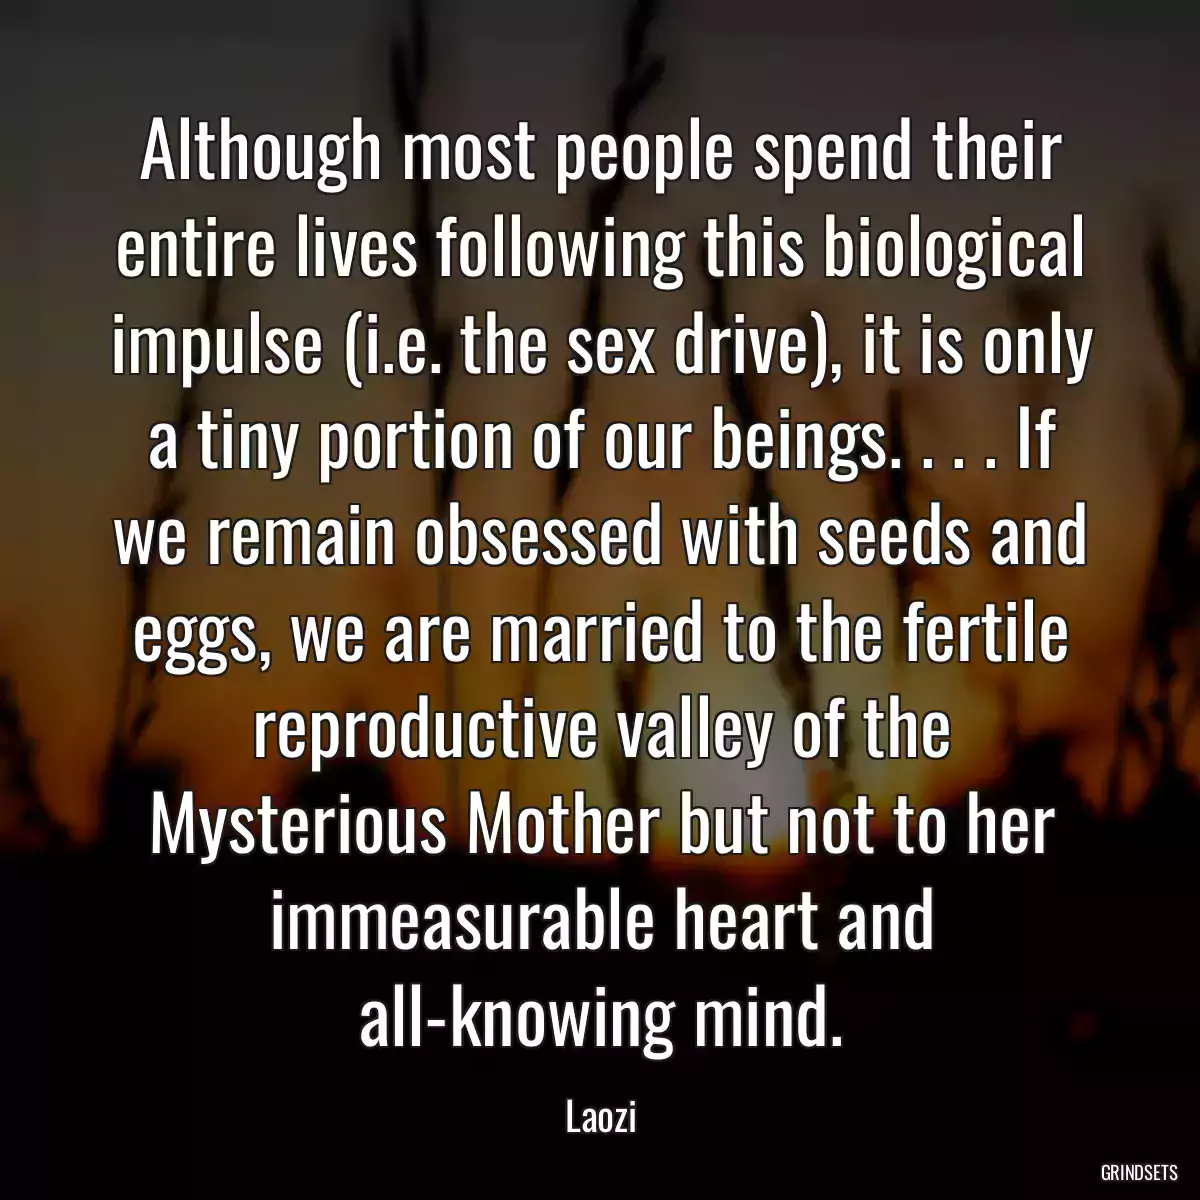 Although most people spend their entire lives following this biological impulse (i.e. the sex drive), it is only a tiny portion of our beings. . . . If we remain obsessed with seeds and eggs, we are married to the fertile reproductive valley of the Mysterious Mother but not to her immeasurable heart and all-knowing mind.